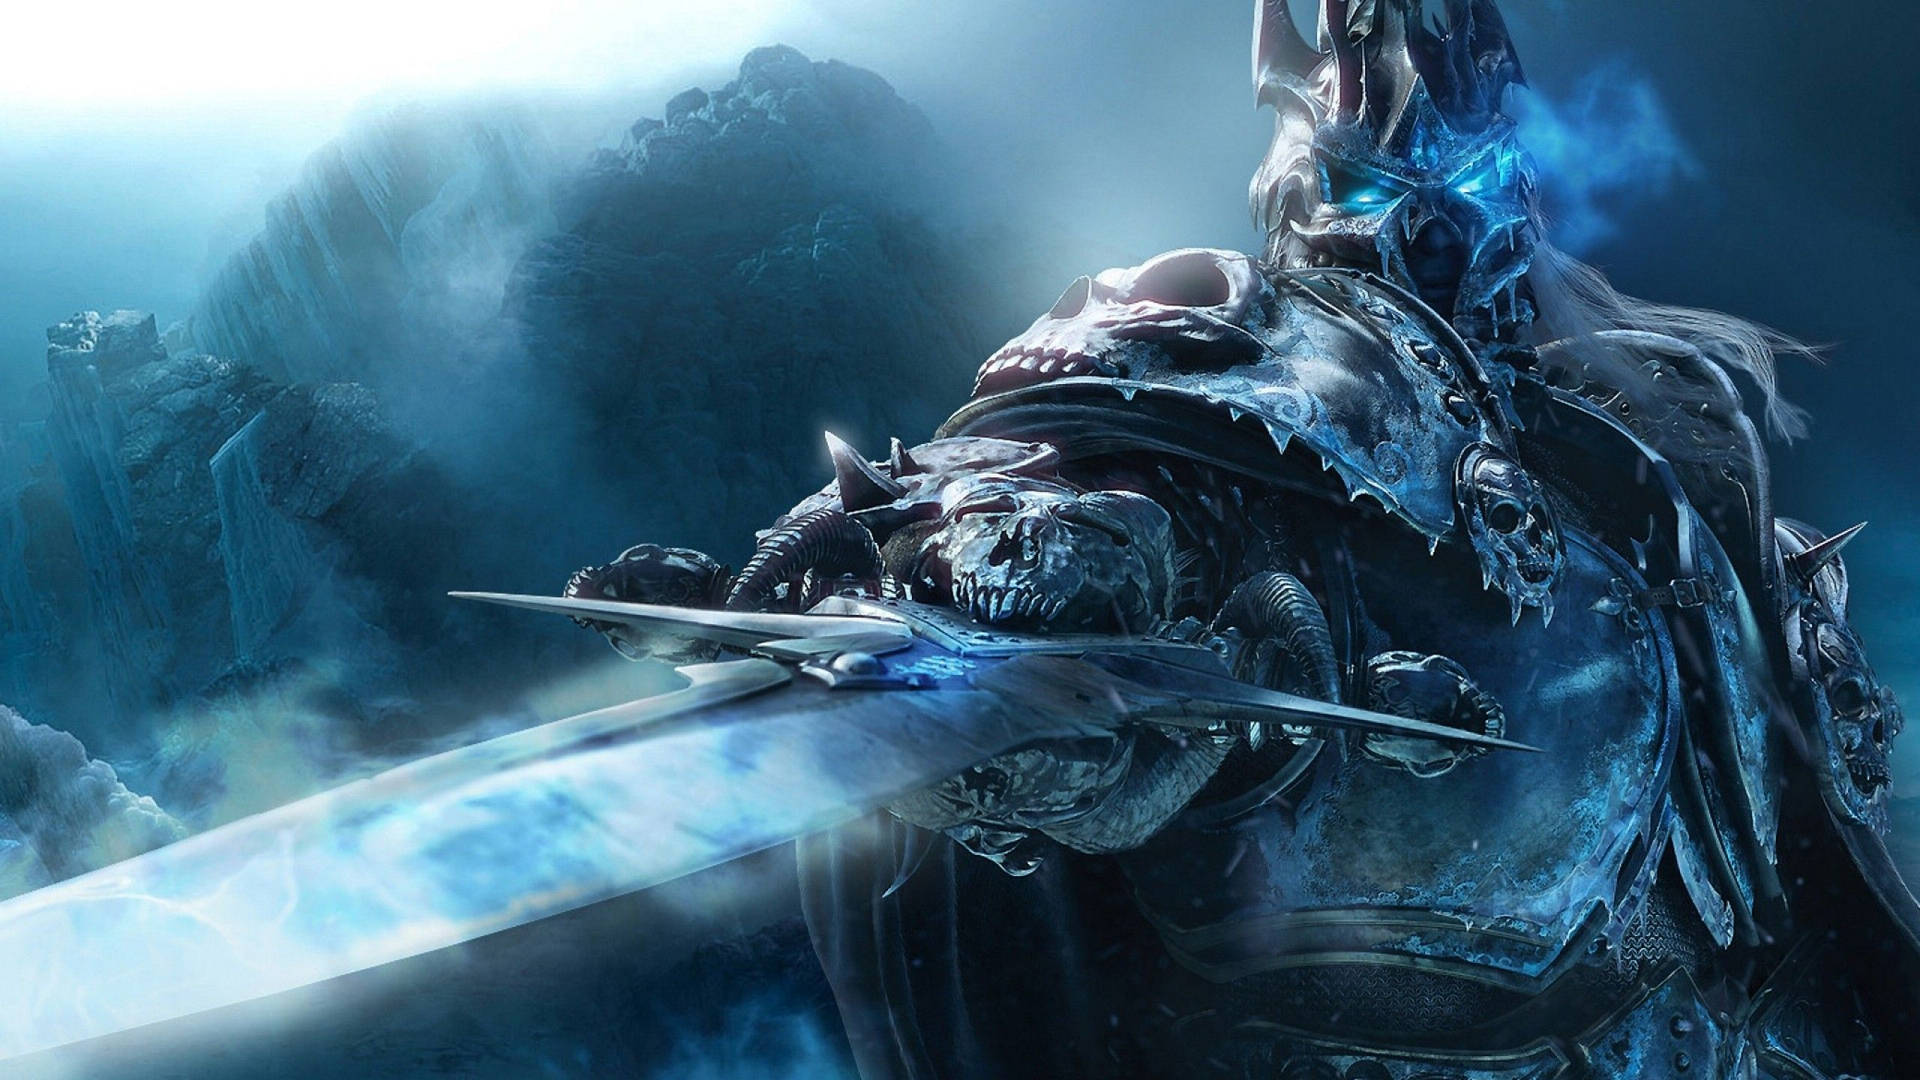 Lich King In Armor 1440p Gaming Wallpaper